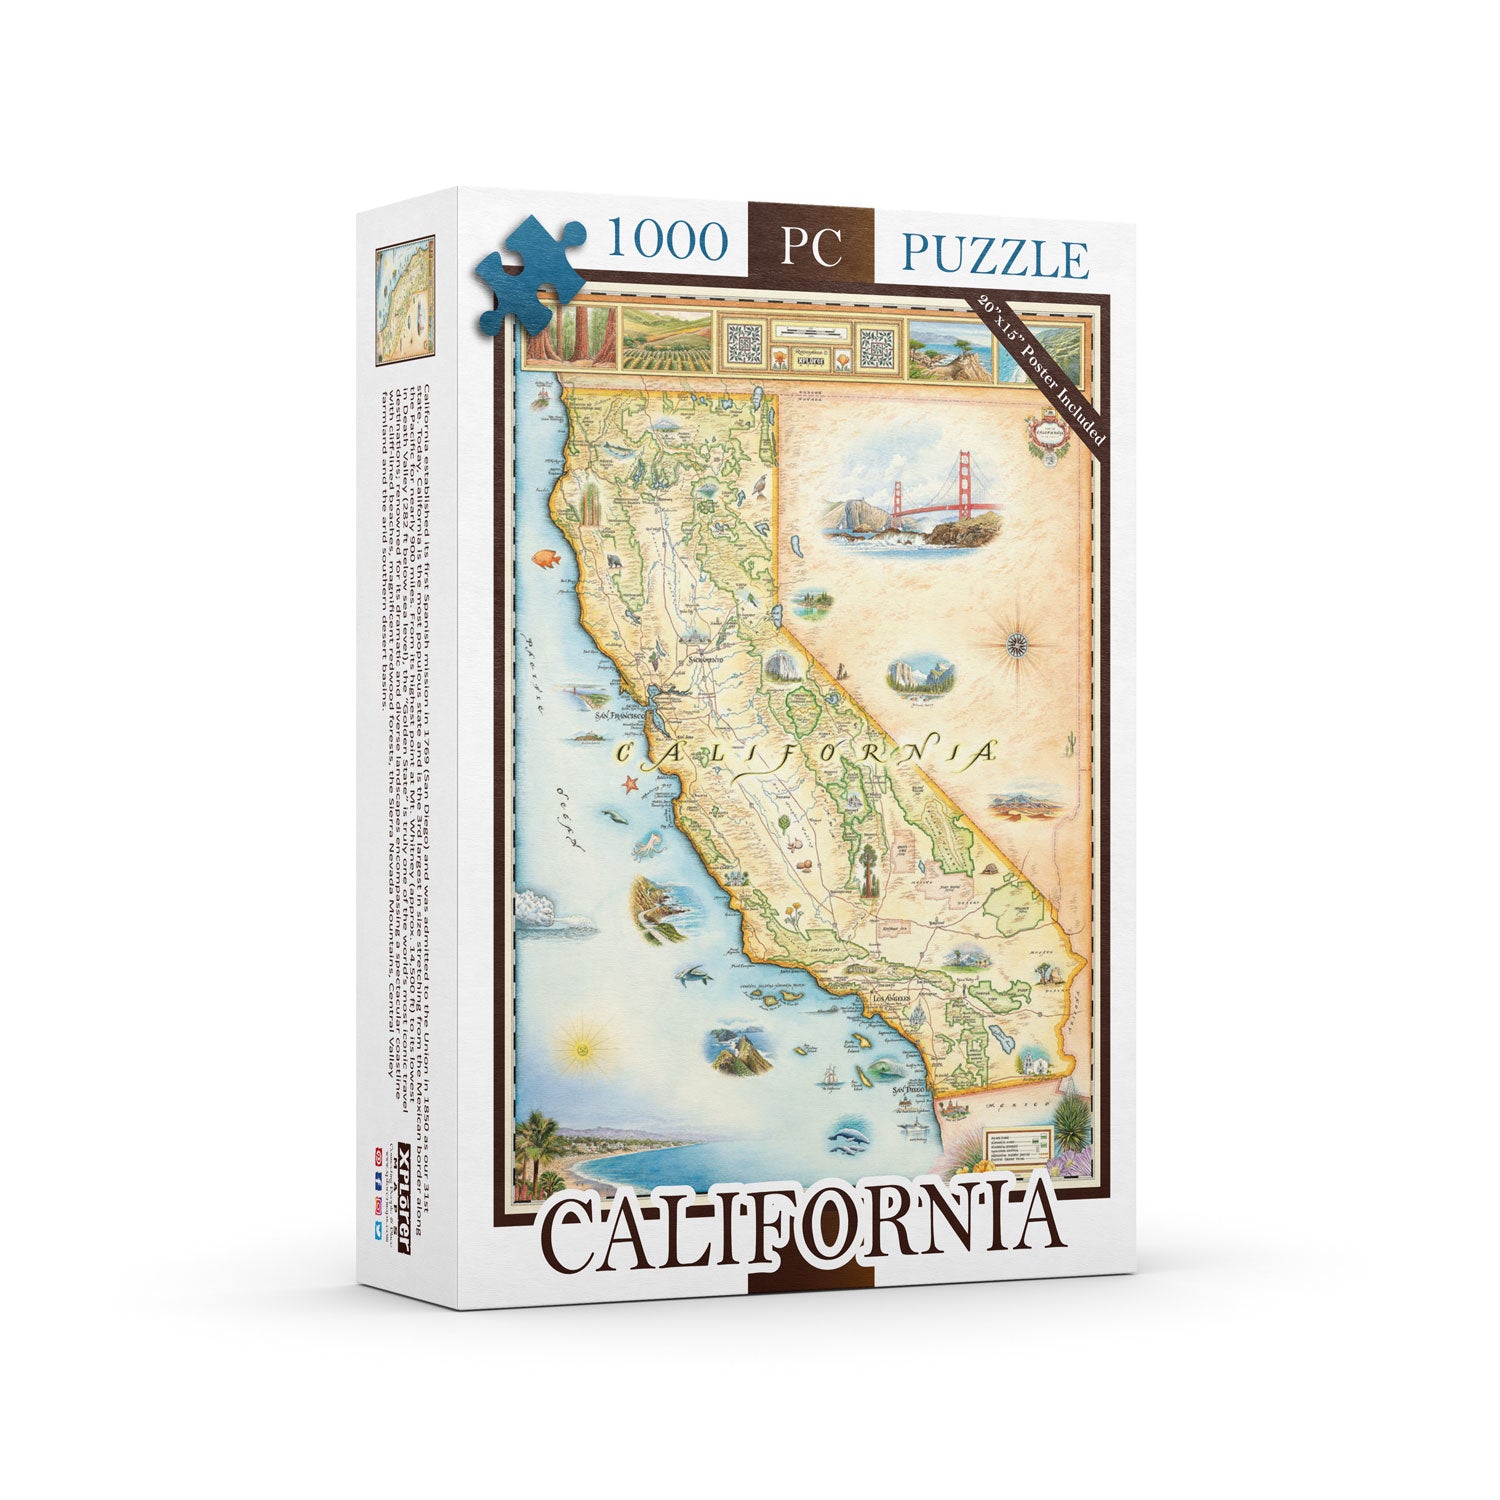 California State Map 1000-piece jigsaw puzzle. California State Map 1000-piece jigsaw puzzle. The map features a black bear, fish, San Francisco, the ocean, the beach, Redwood Trees, and the Golden Gate Bridge. 